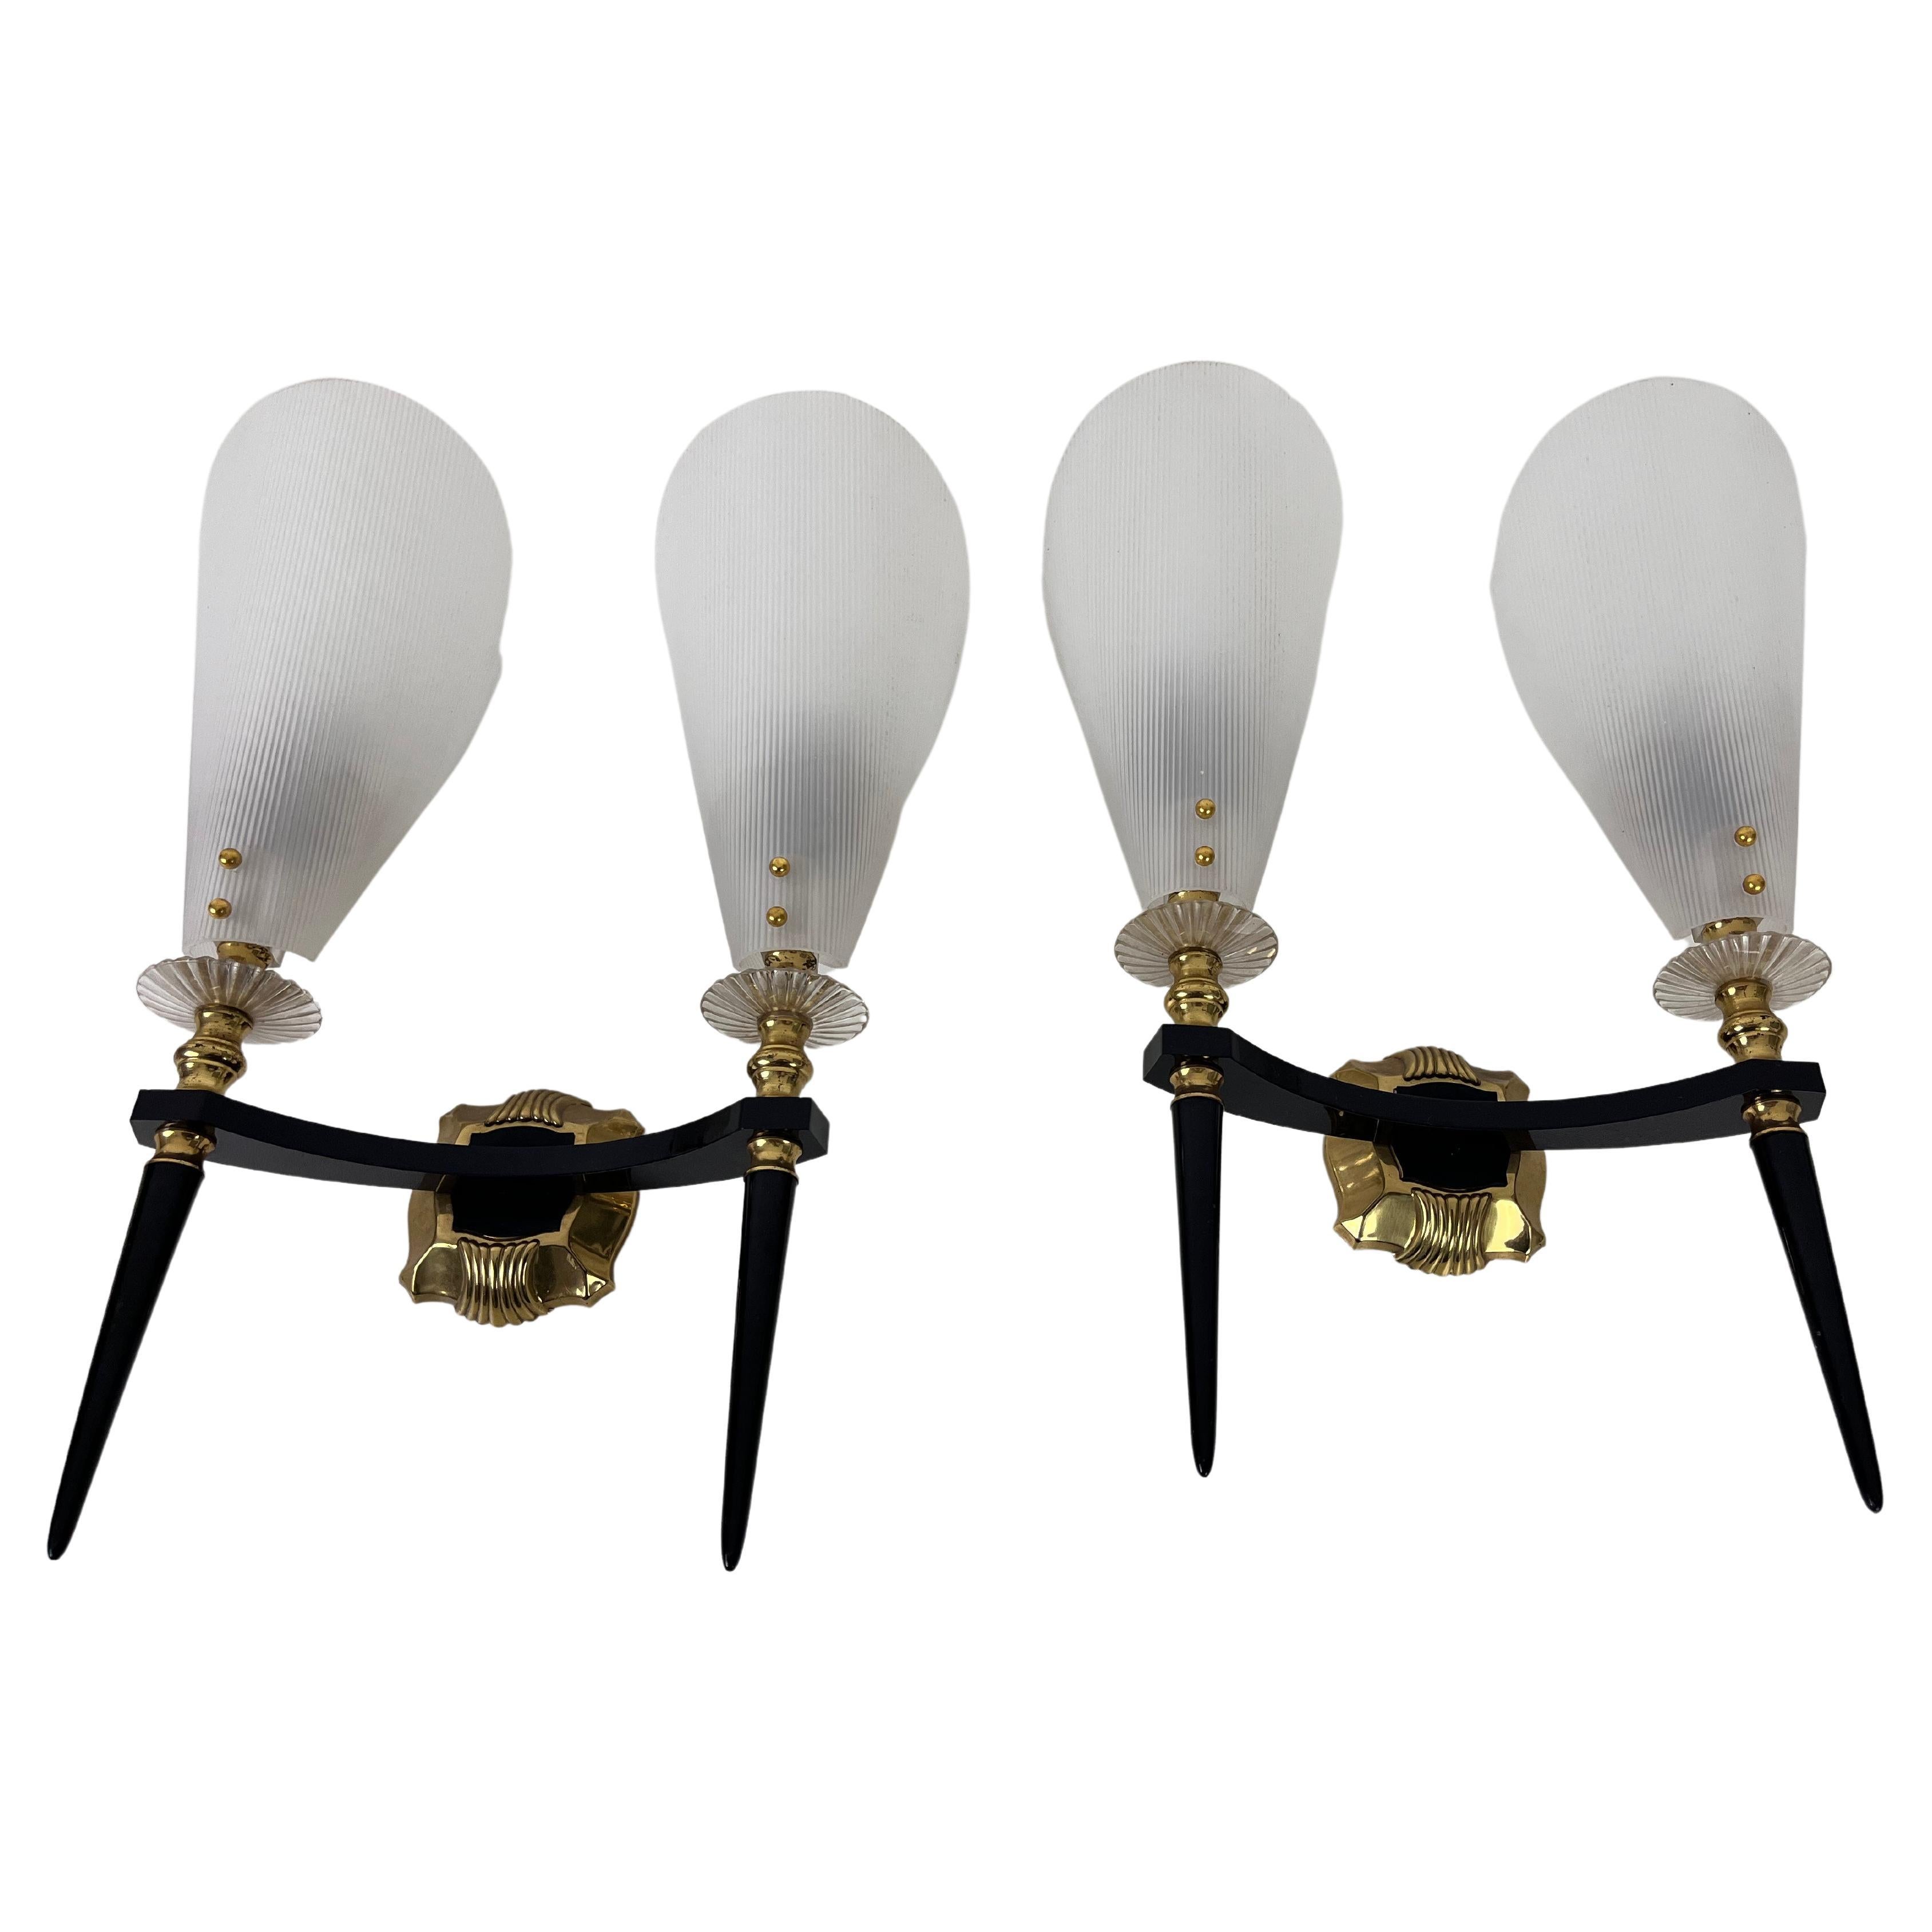 Pair of 2 Brass and Plexiglass Wall Lamps by Maison Arlus, 1960, France